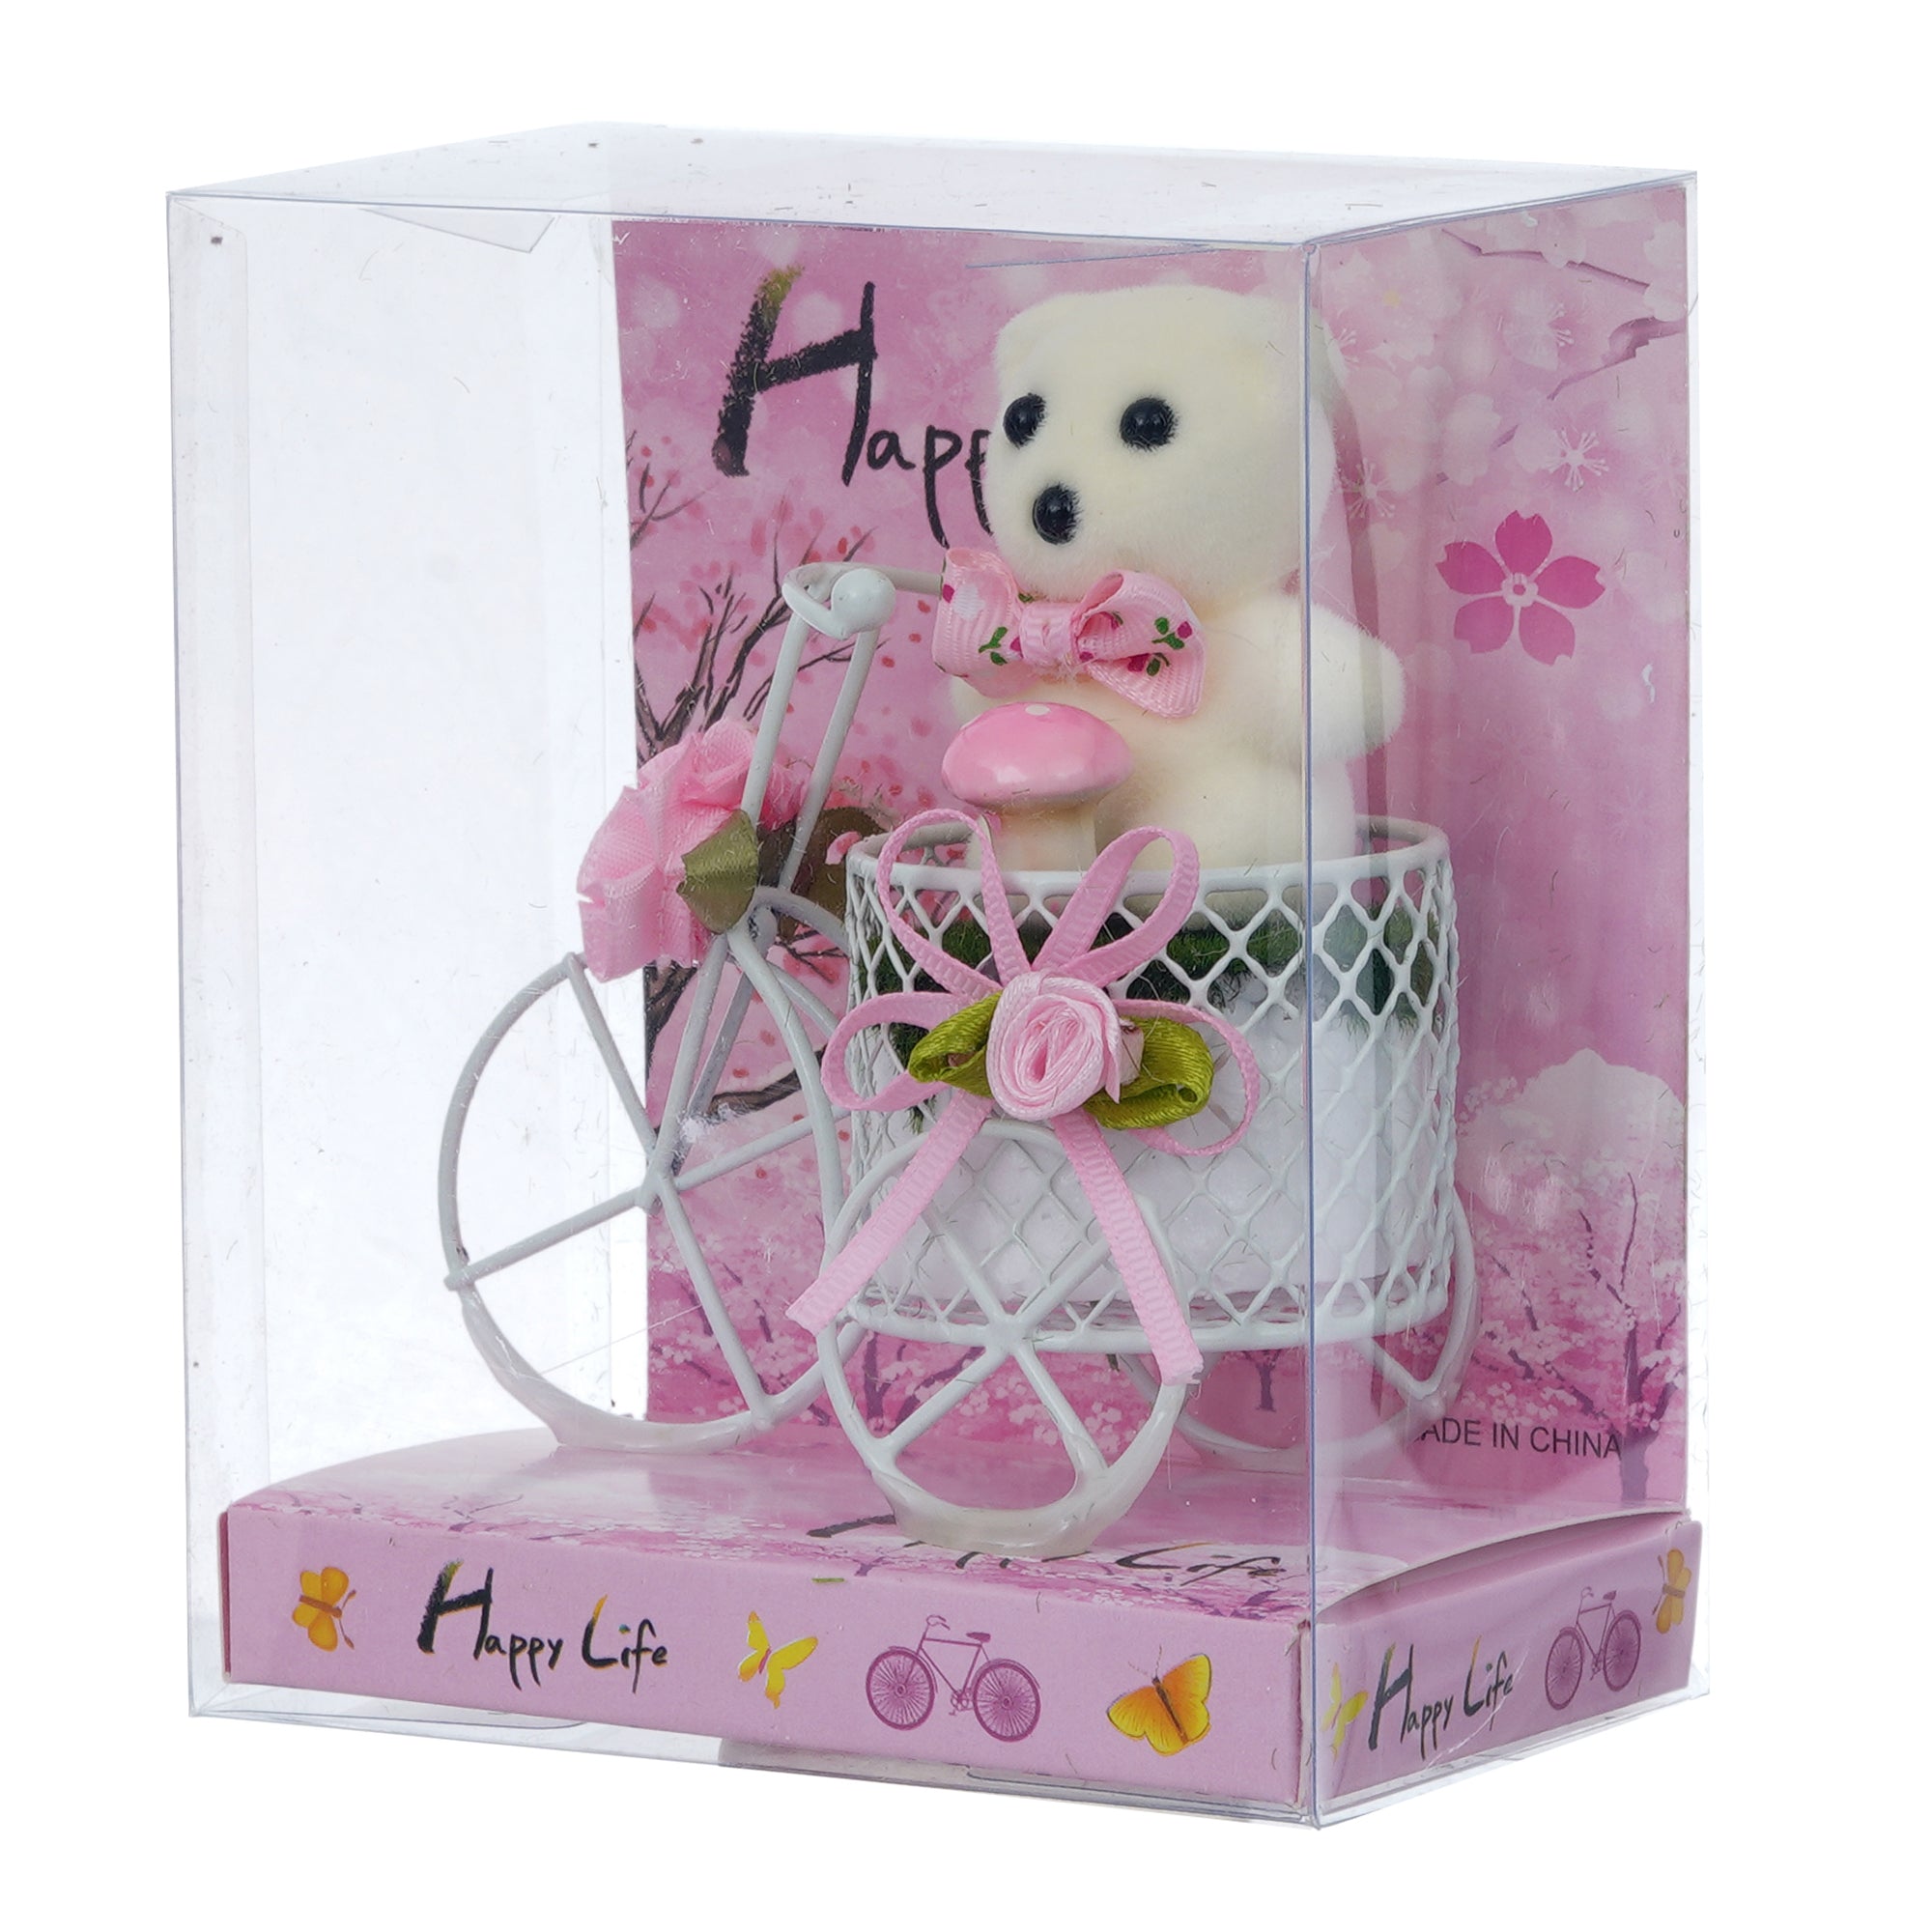 White Cycle with Teddy Bear and Rose Petals Gift Box 6